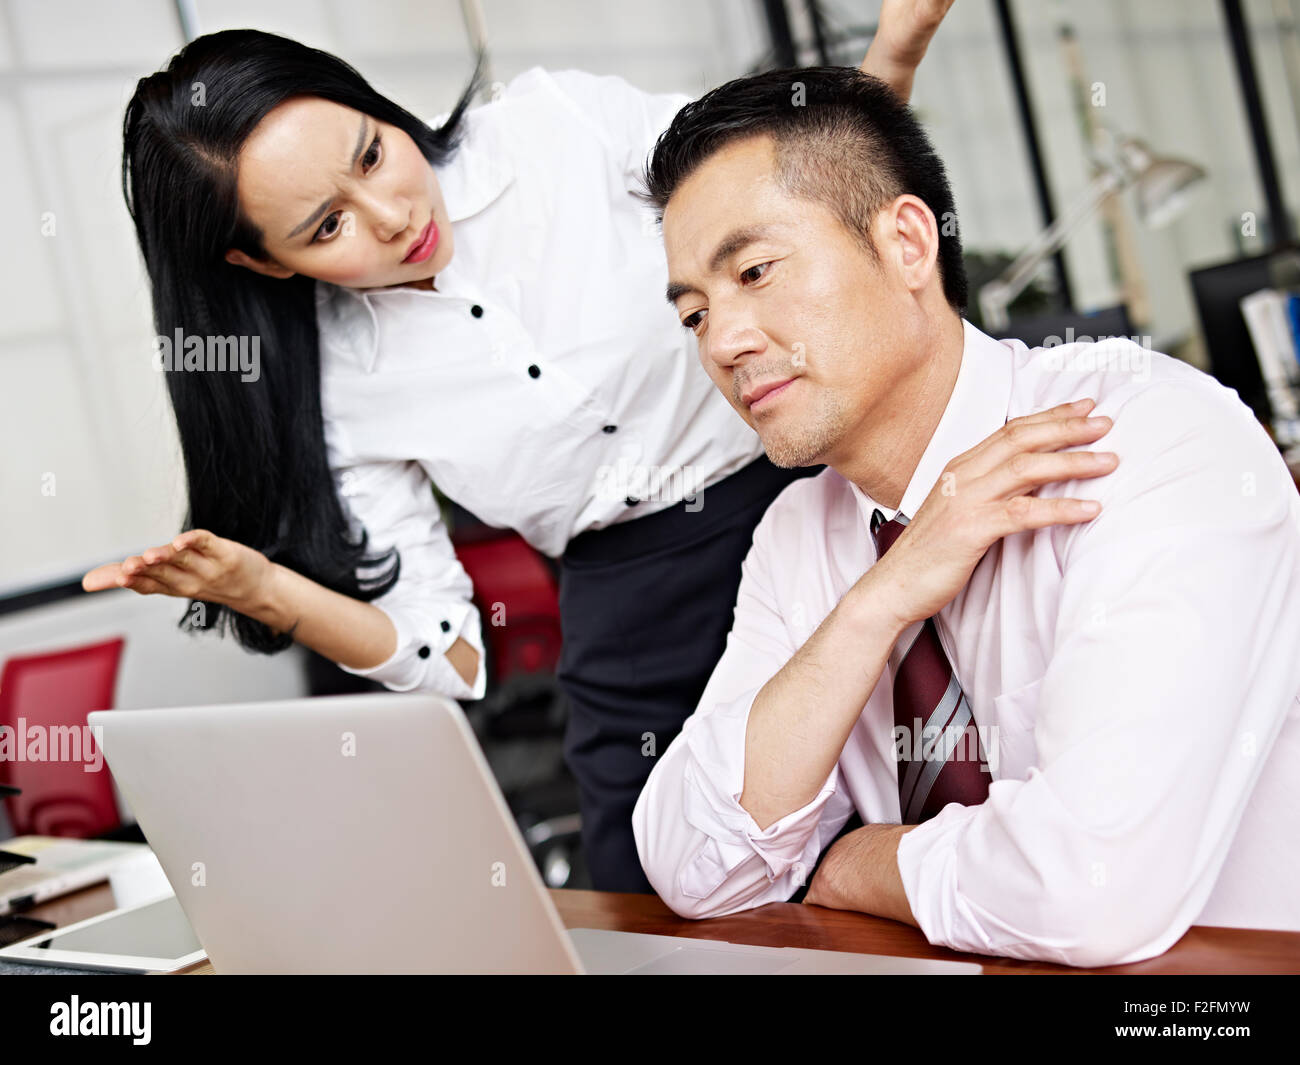 female office worker angry at male colleague's behavior Stock Photo